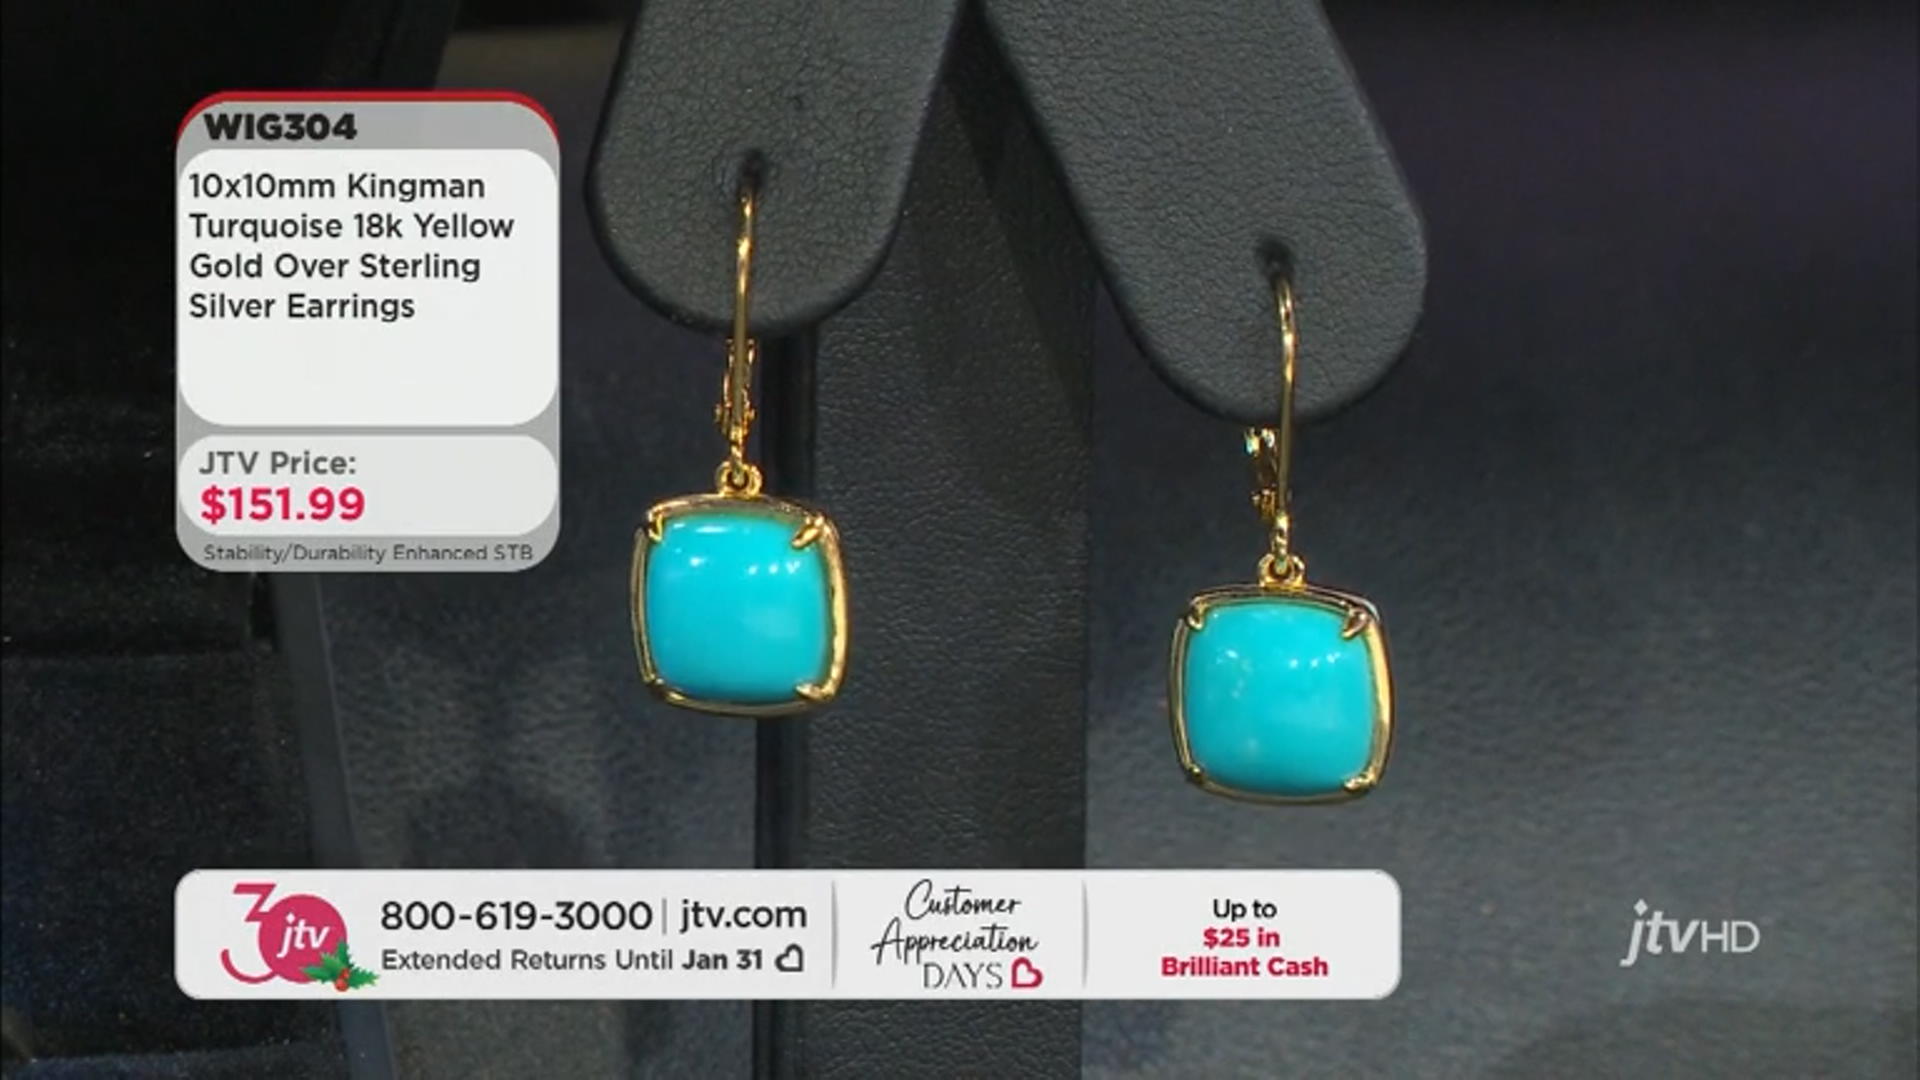 Blue Kingman Turquoise 18k Yellow Gold Over Sterling Silver Earrings 10x10mm Video Thumbnail